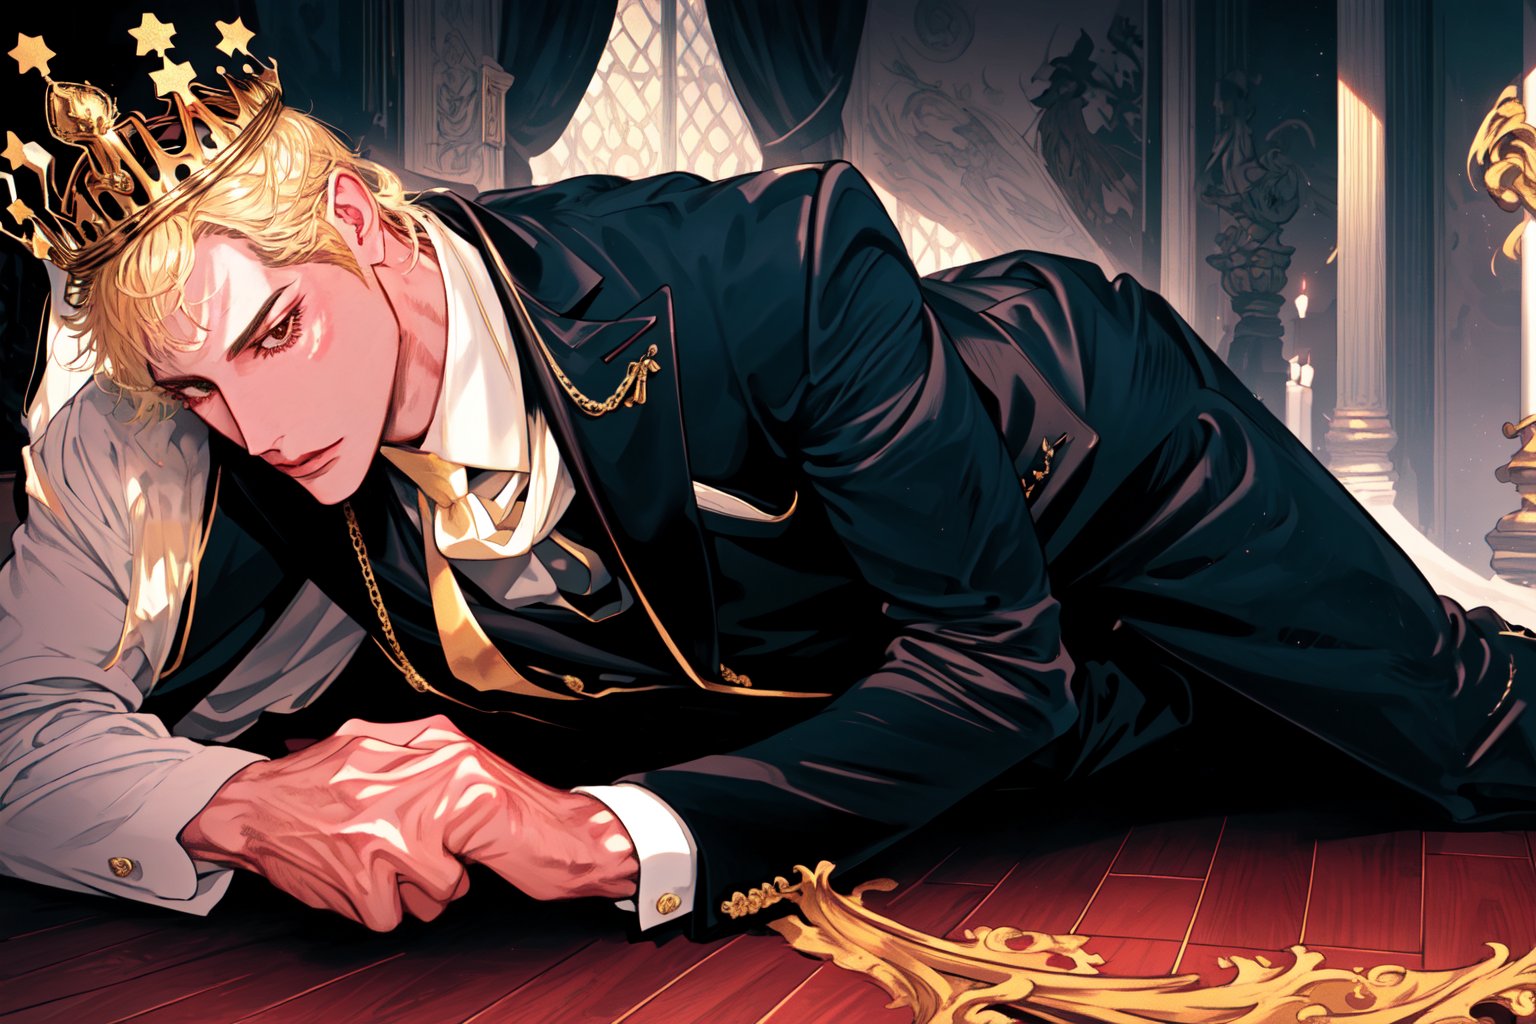 Man with a large golden crown on his head,
Serious and firm expression
Dressed in a suit and white tie
Looking at the floor 
,Dark king